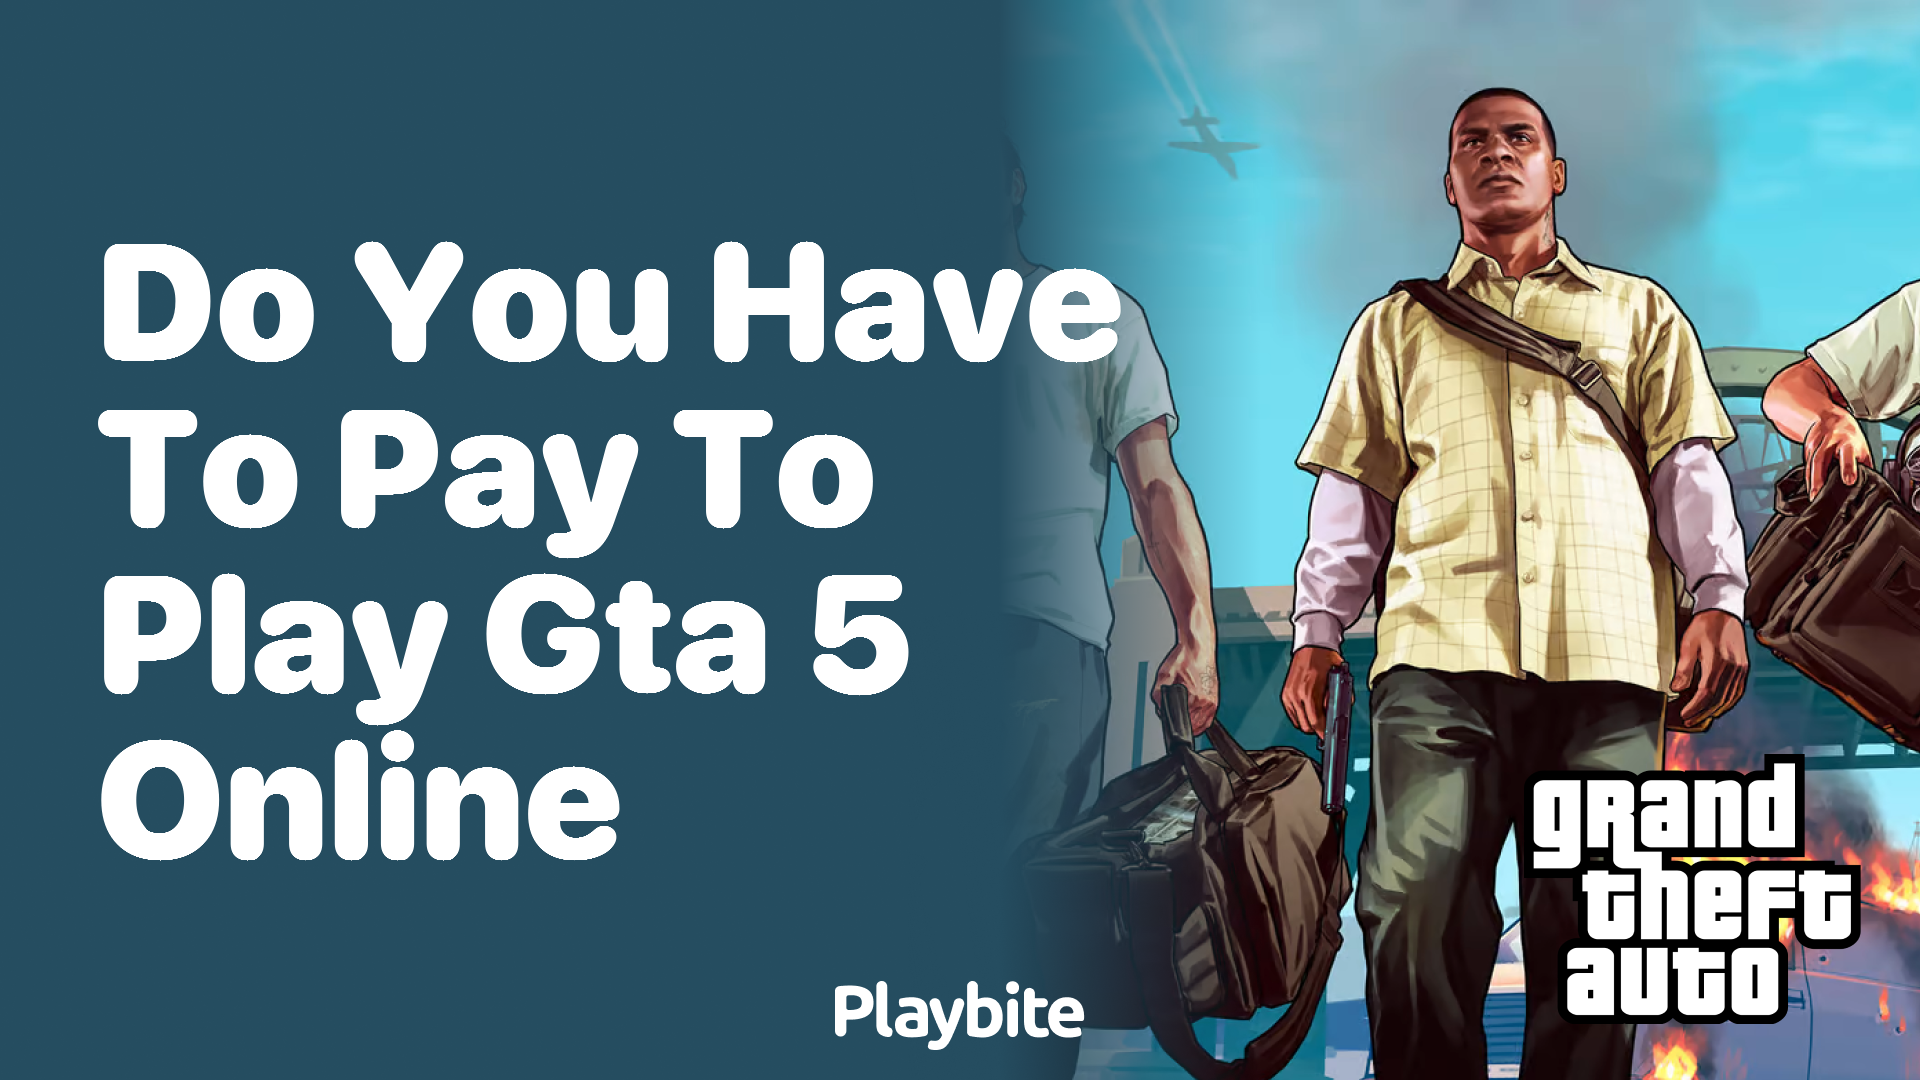 Do you have to pay to play GTA 5 online?